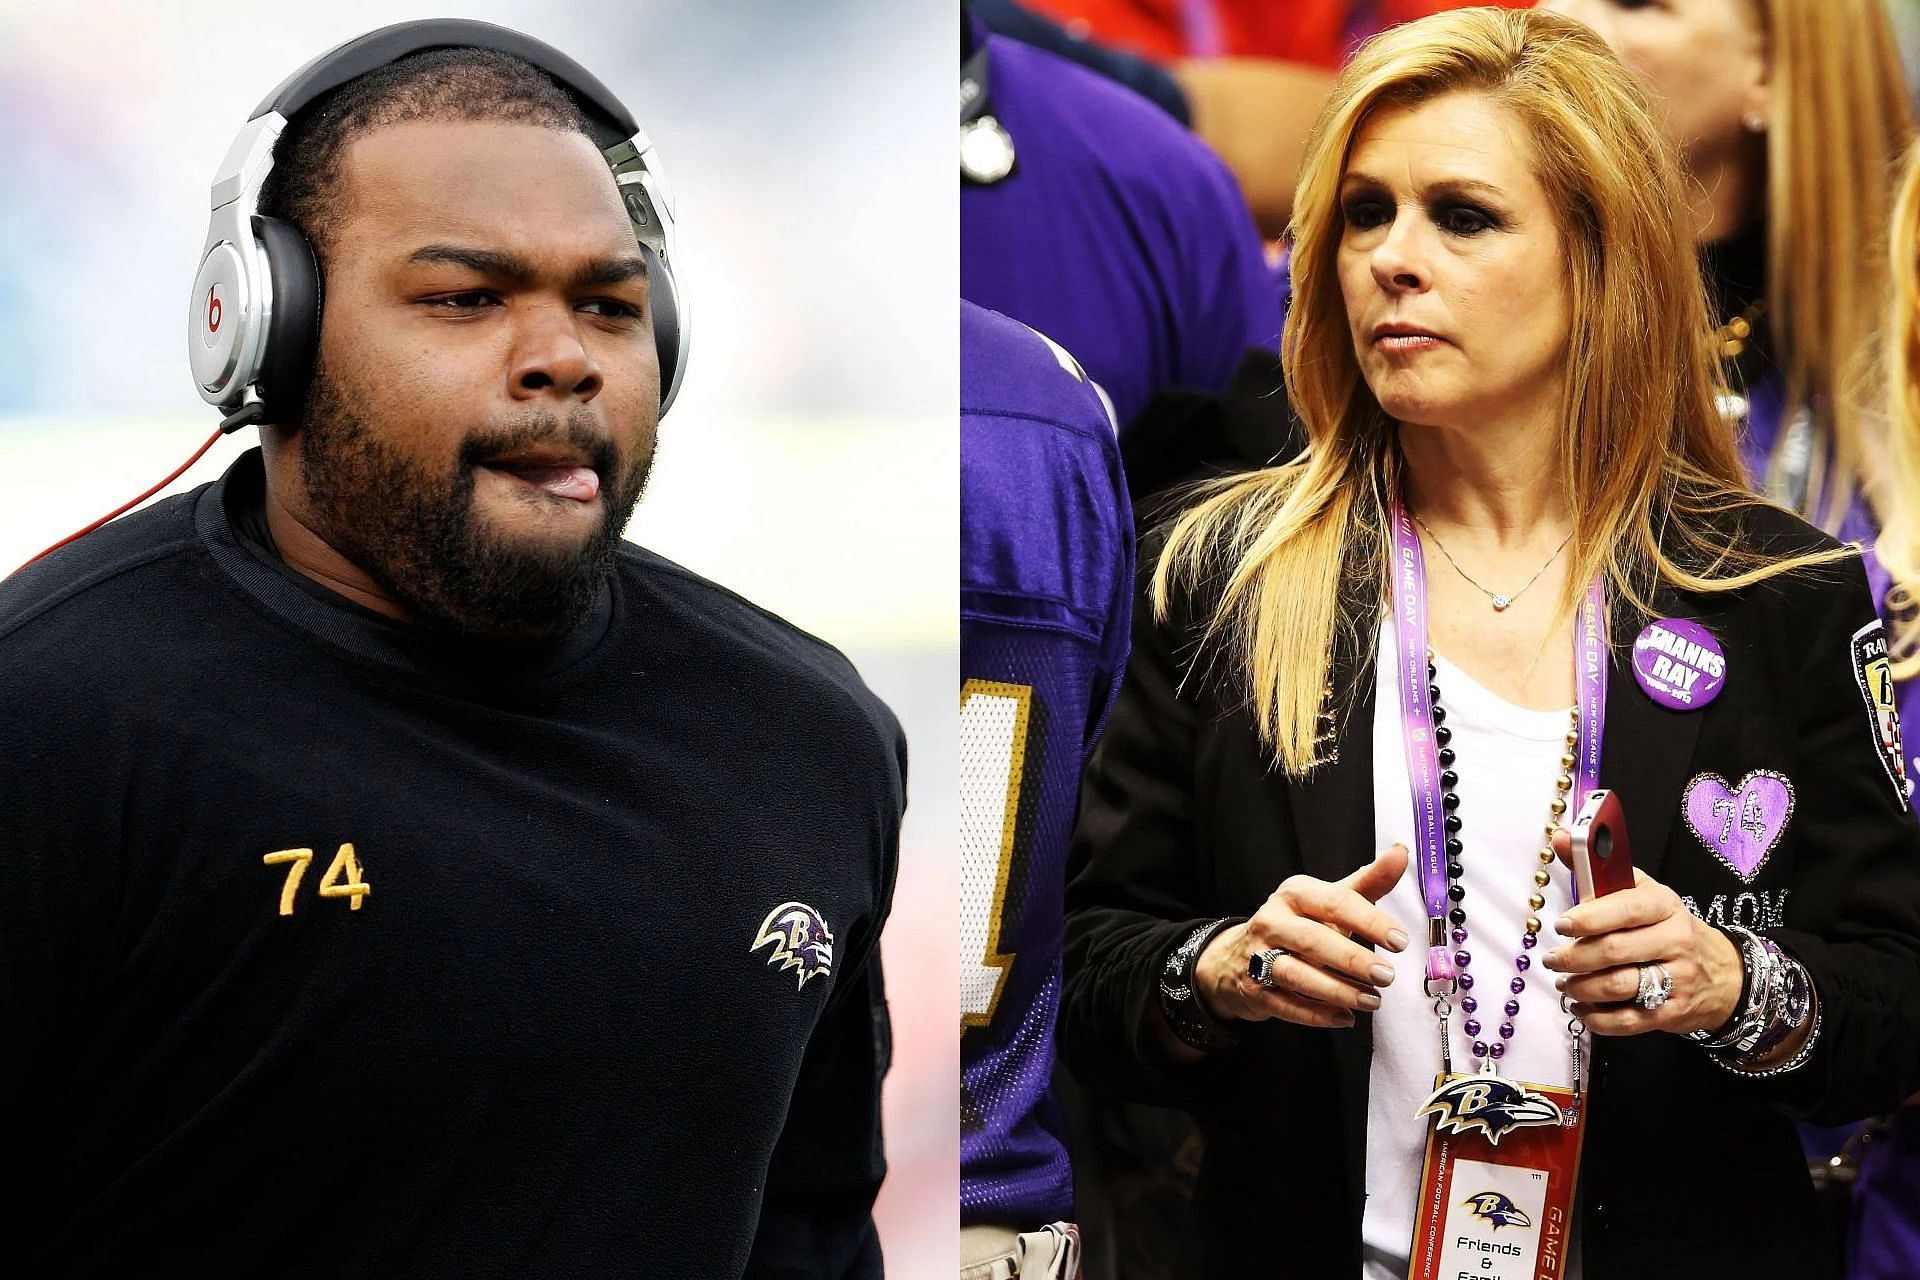 Memphis residents call out Leigh Tuohy and family after Michael Oher reveals shocking details about &lsquo;The Blind Side&rsquo;